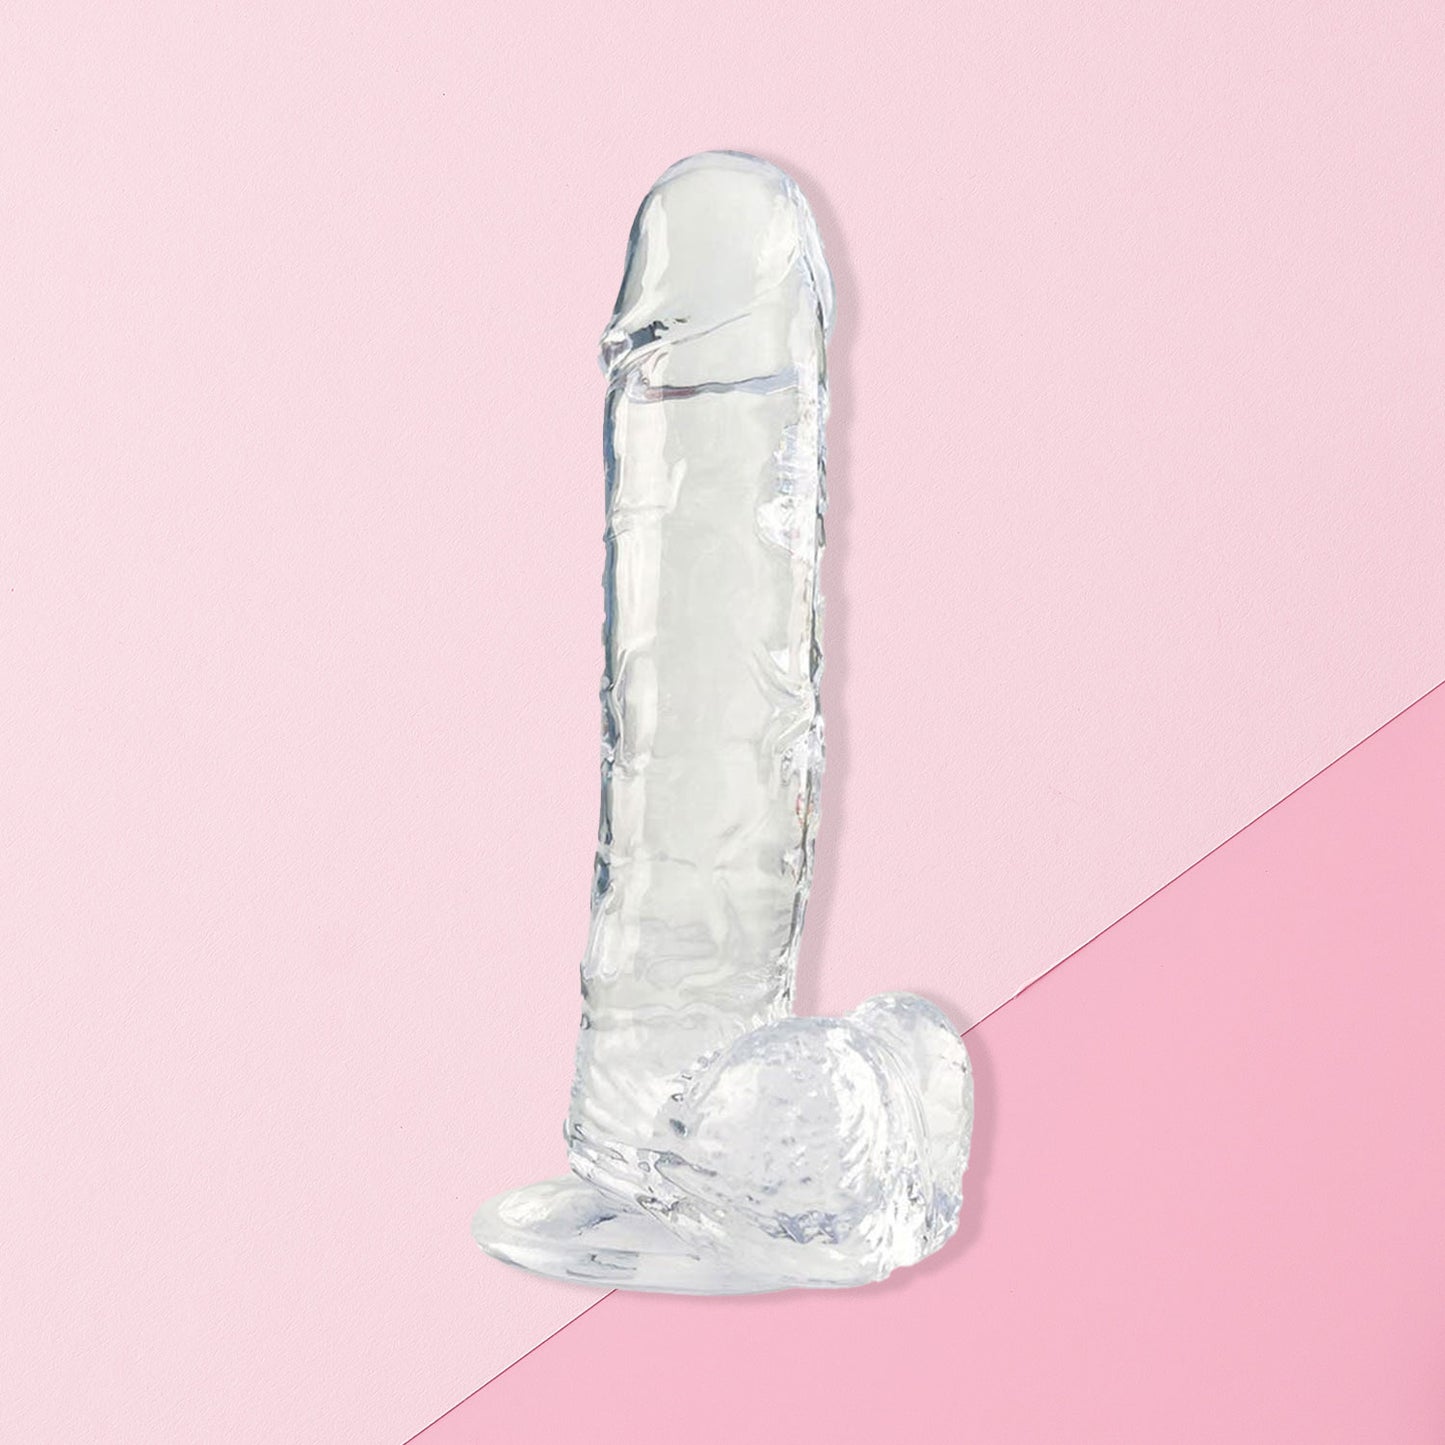 The Horny Company - No Frills Dildo 18.5cm x 3.7cm Suction Cup Dong with Balls Clear